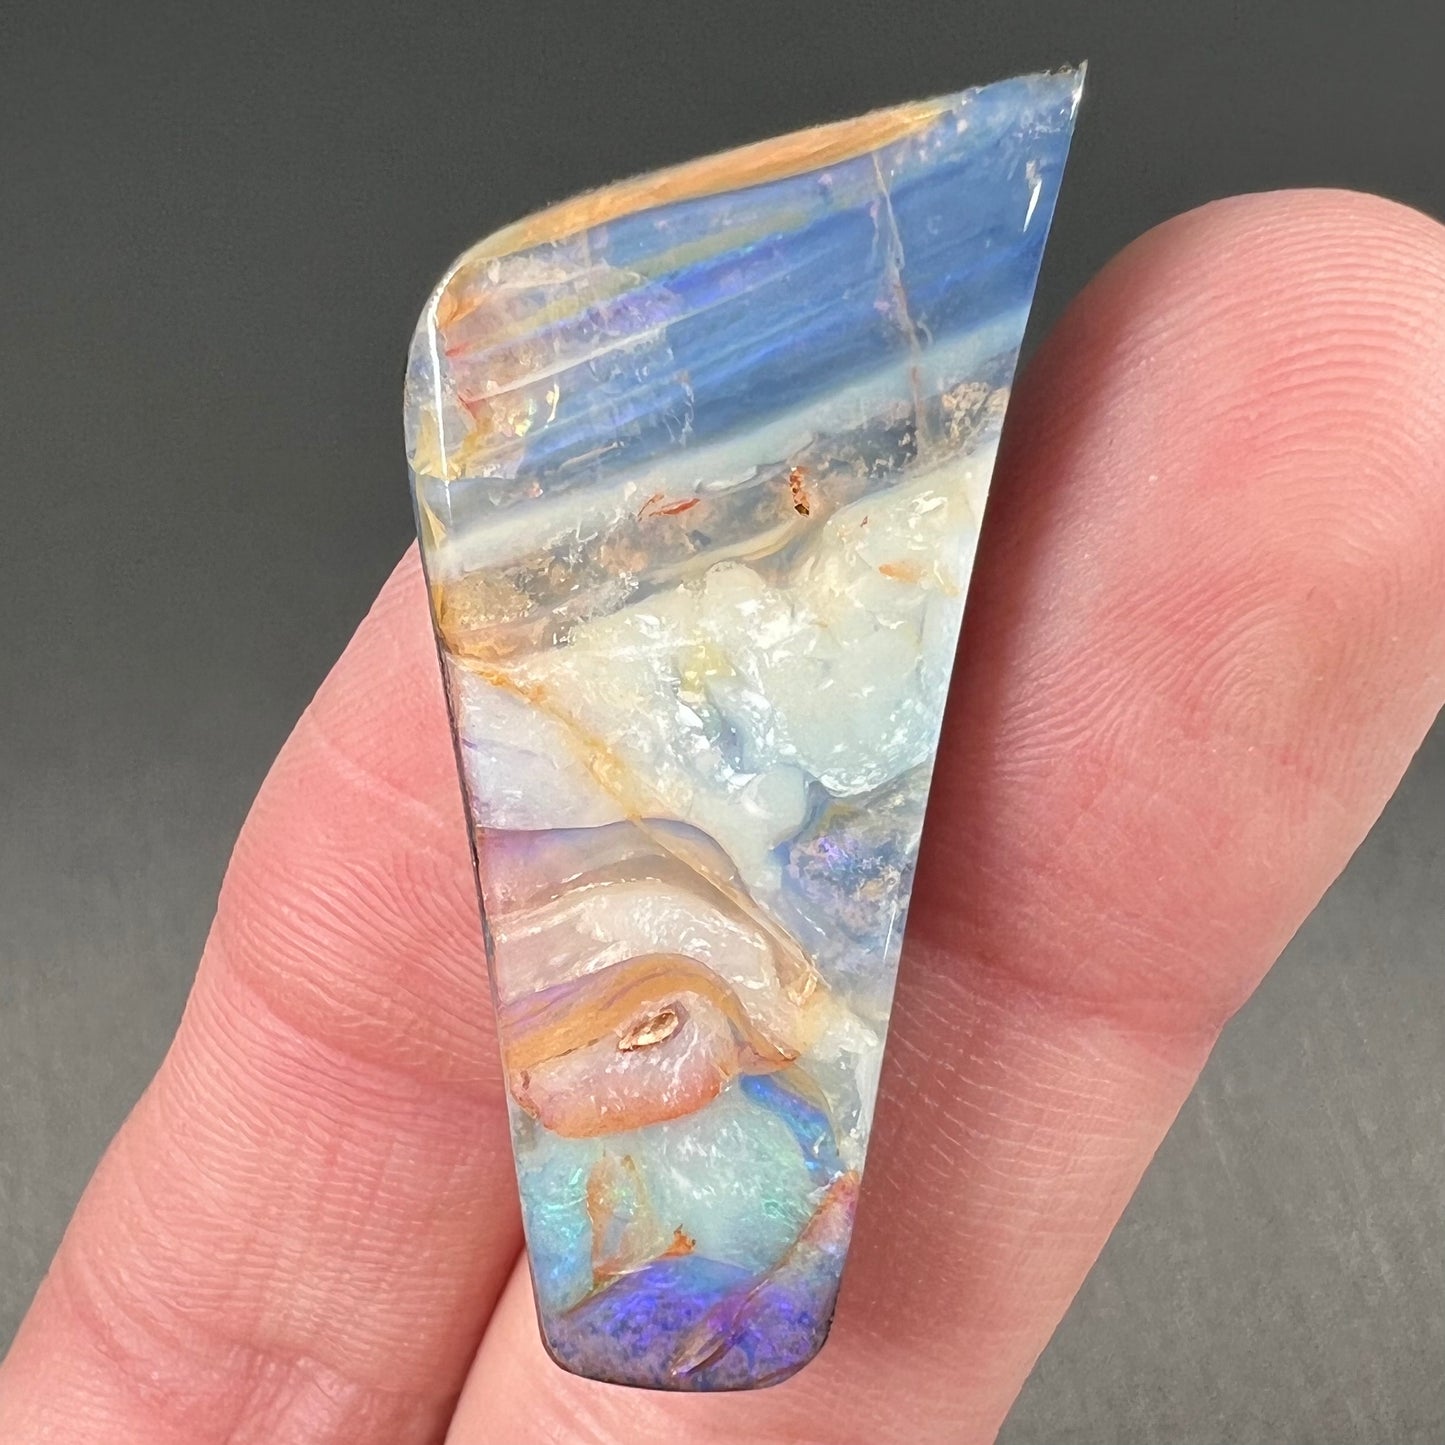 A loose, freeform cut, patterned Quilpie boulder opal stone from Queensland, Australia.